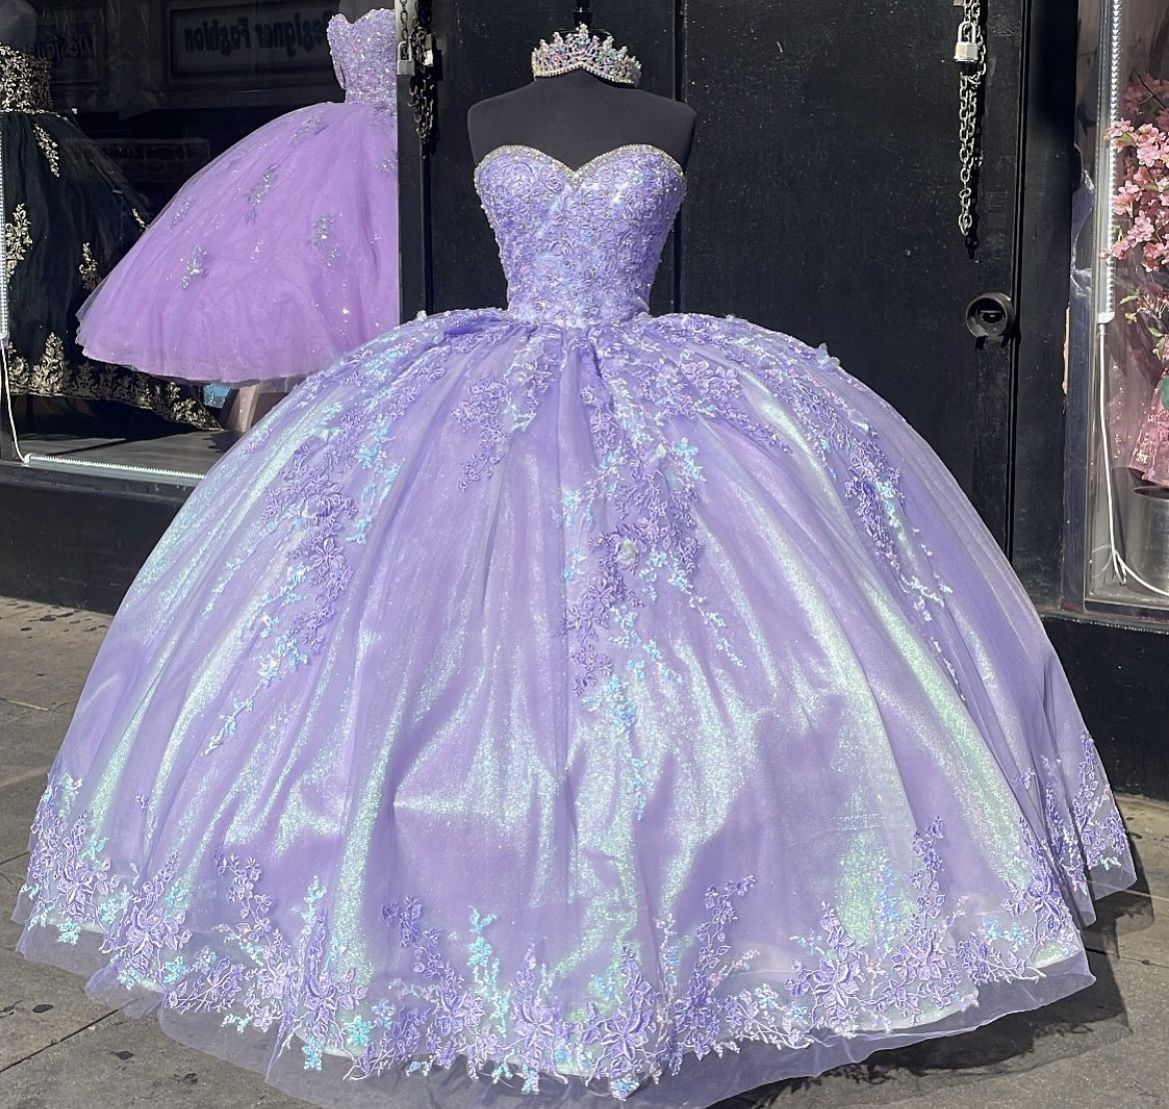 Princess Lace Lavender Quinceanera Dress Ball Gown Sweet 16 Dress Y2119